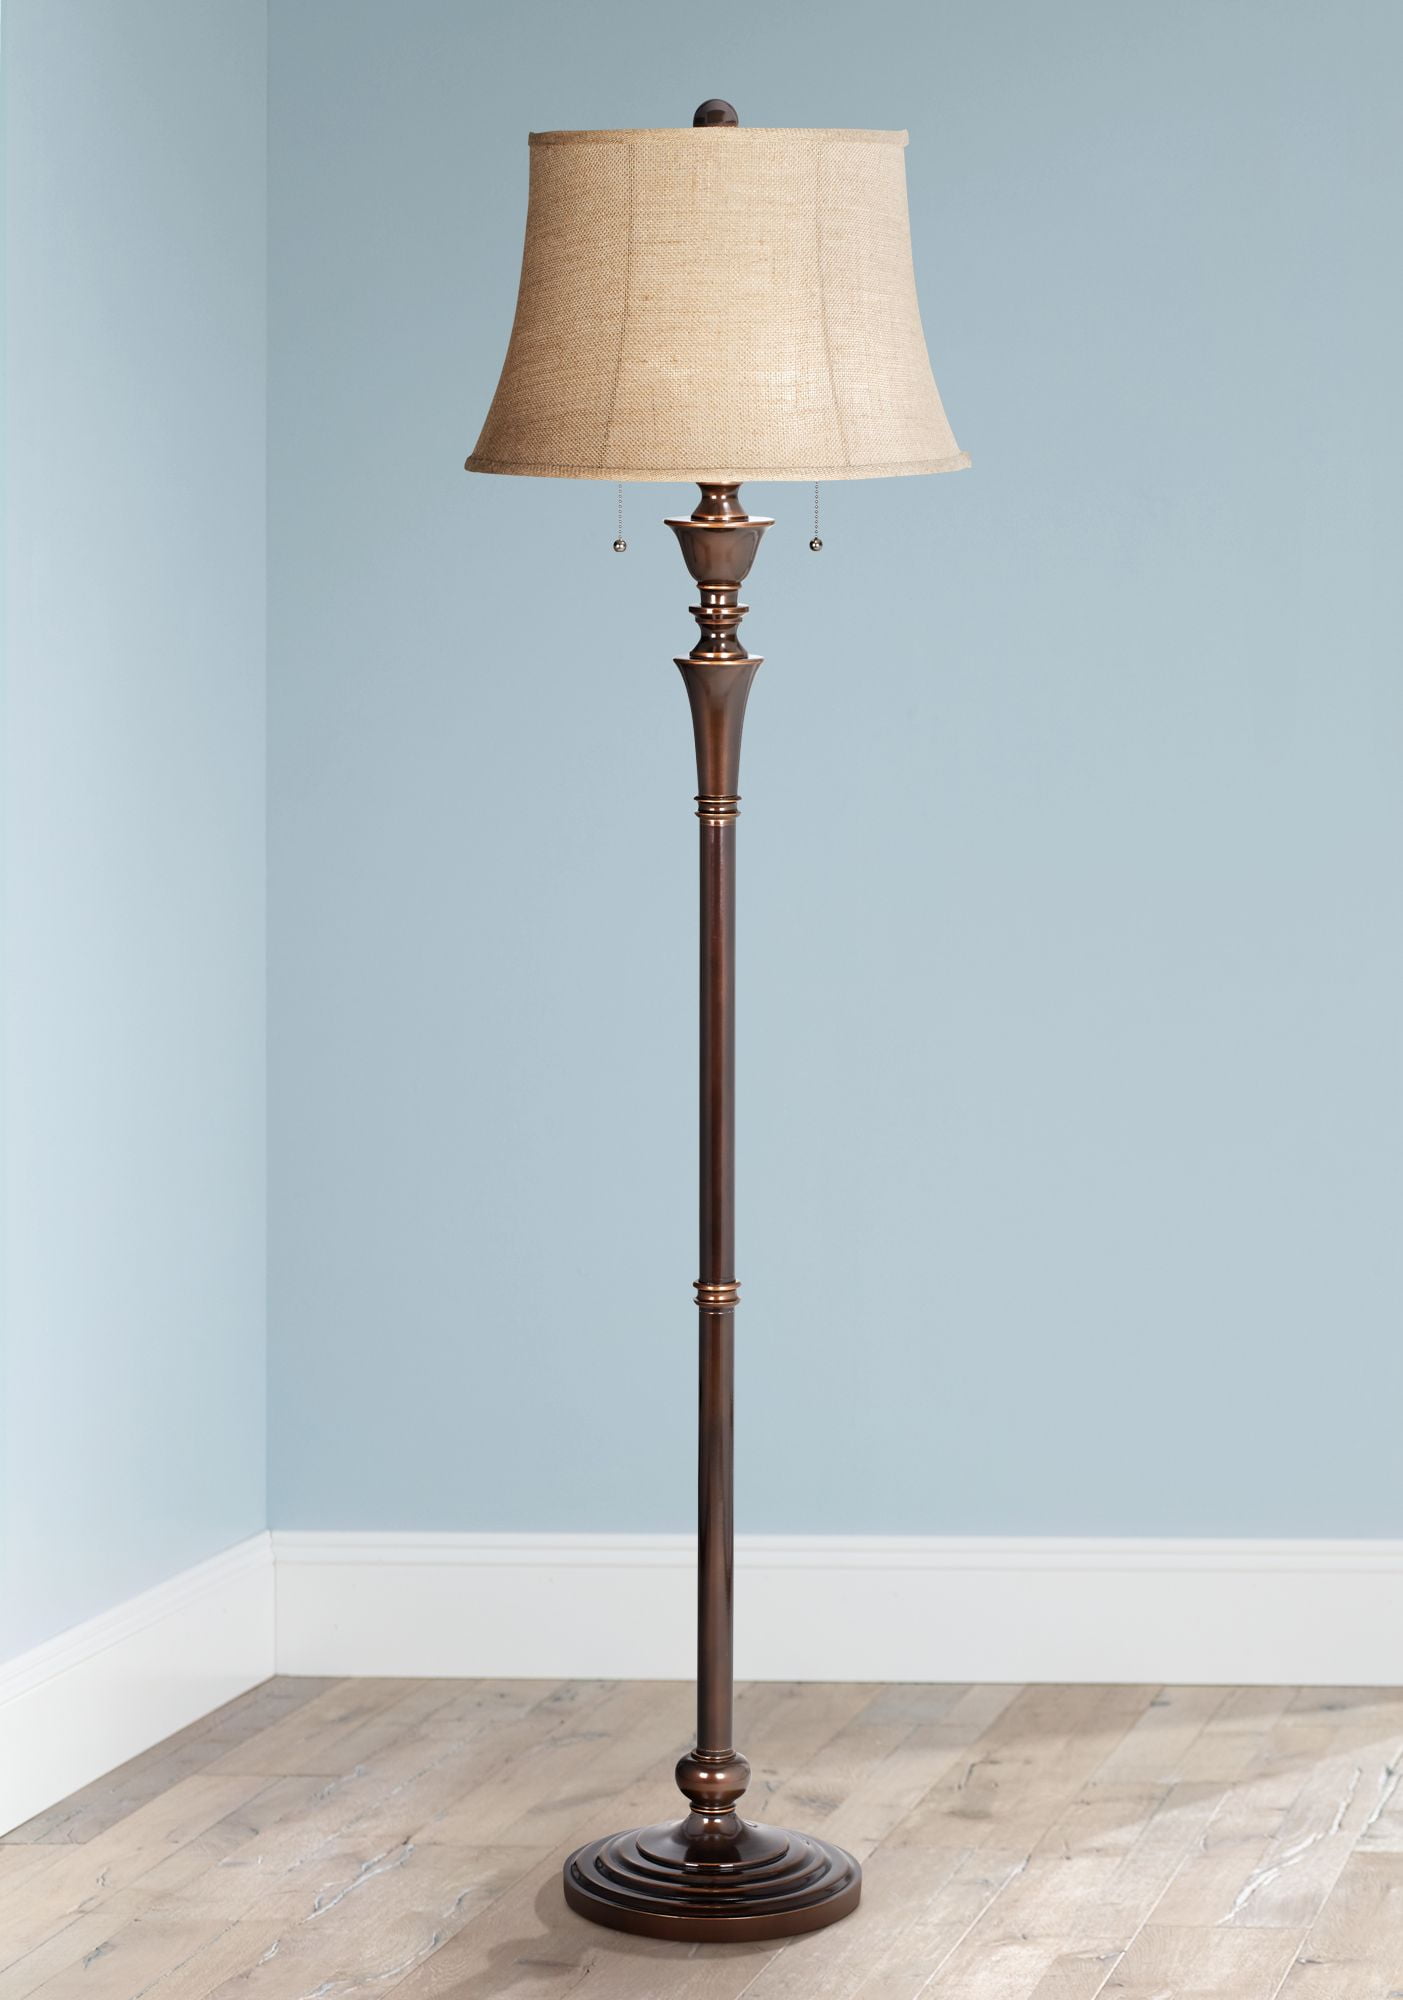 Regency Hill Traditional Floor Lamp 60" Tall Rich Bronze with Copper